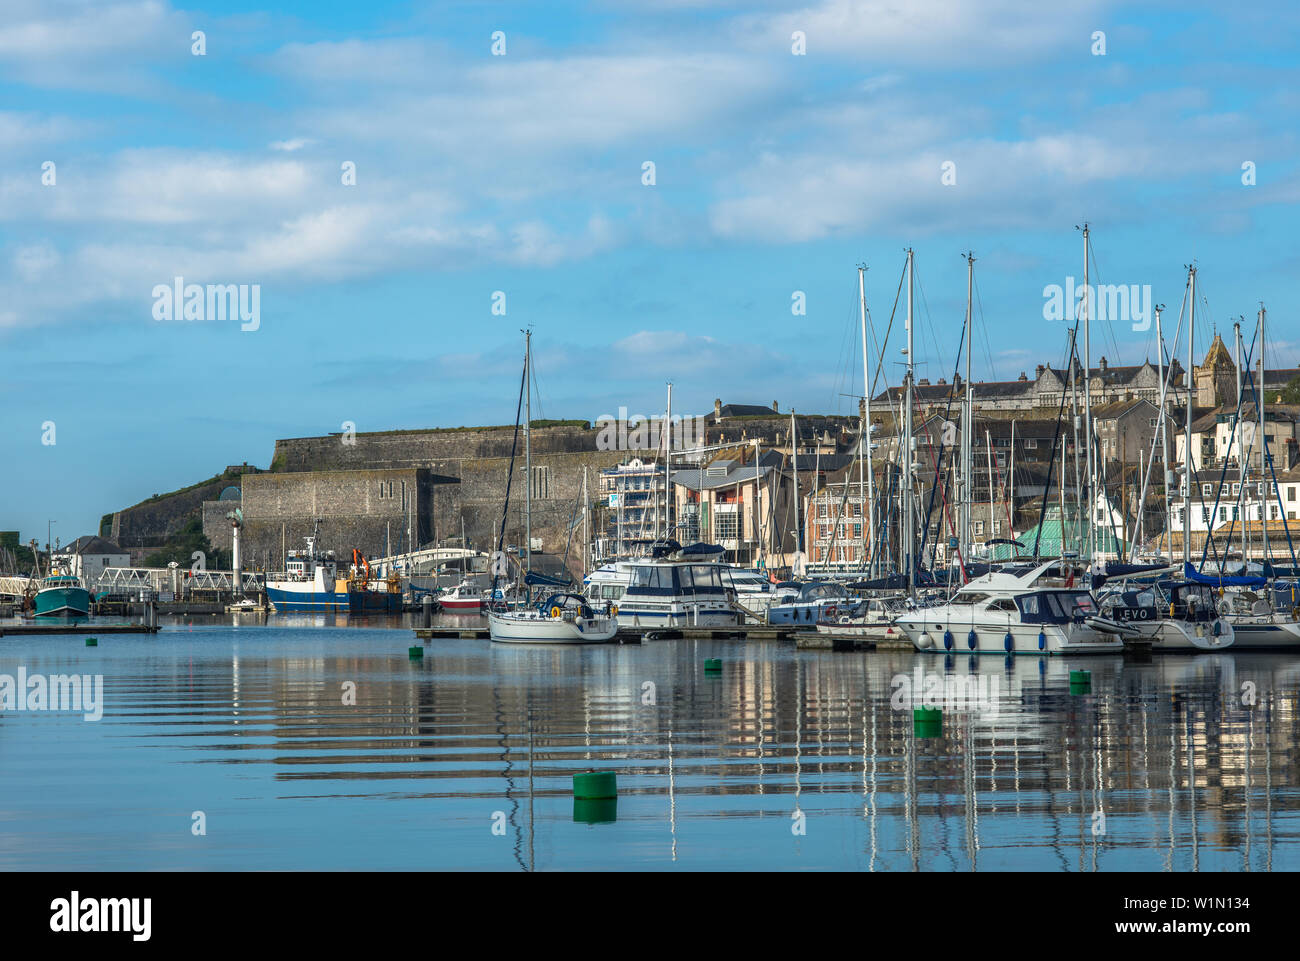 Sutton Harbour, formerly known as Sutton Pool, original port of City of Plymouth in the historic Barbican district with Royal Citadel. Devon, England. Stock Photo